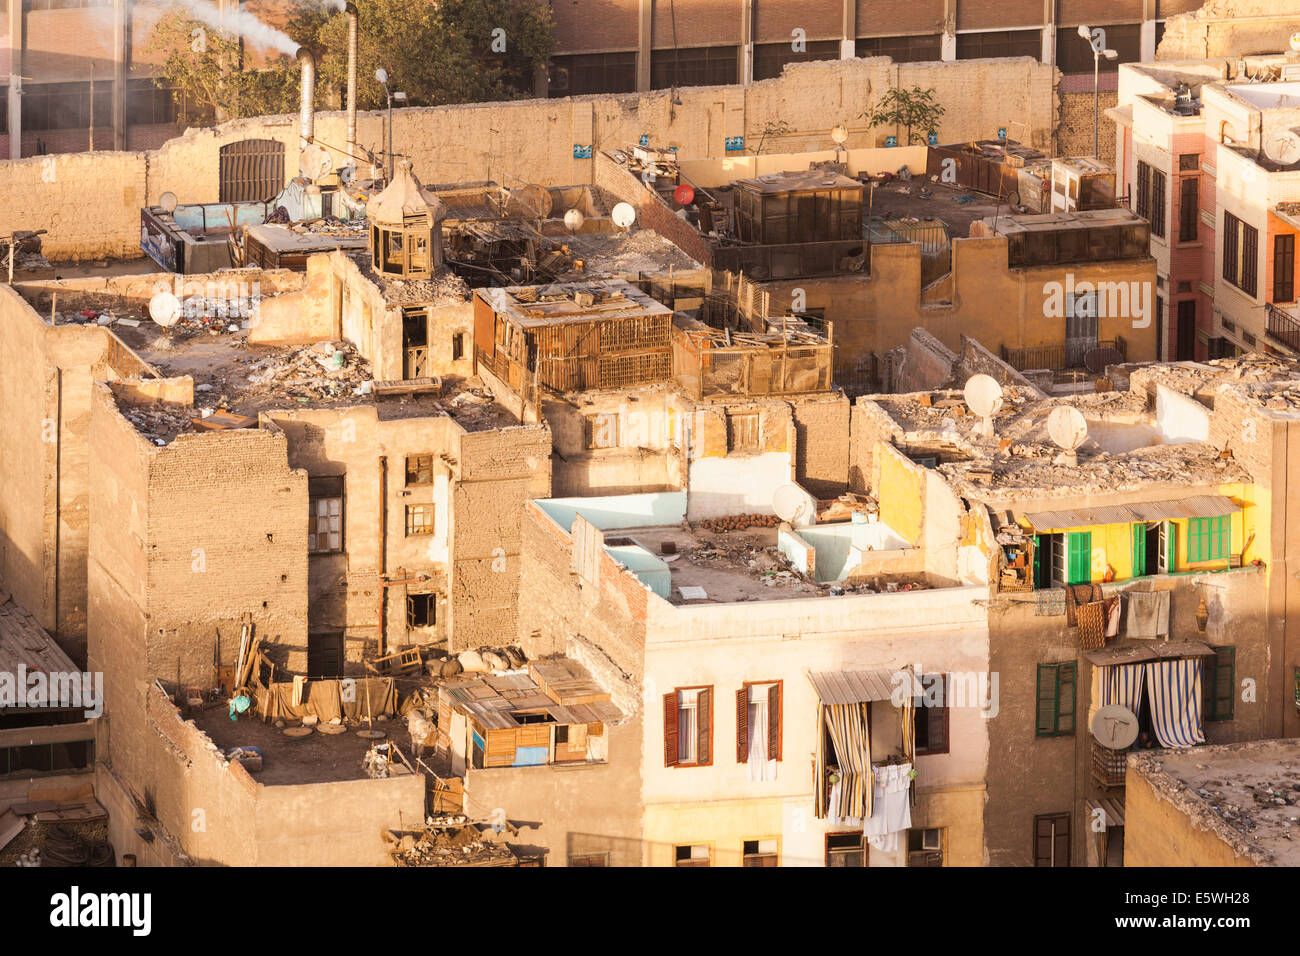 Cairo, Egypt - Roofs of slum buildings in downtown Cairo city center Stock Photo